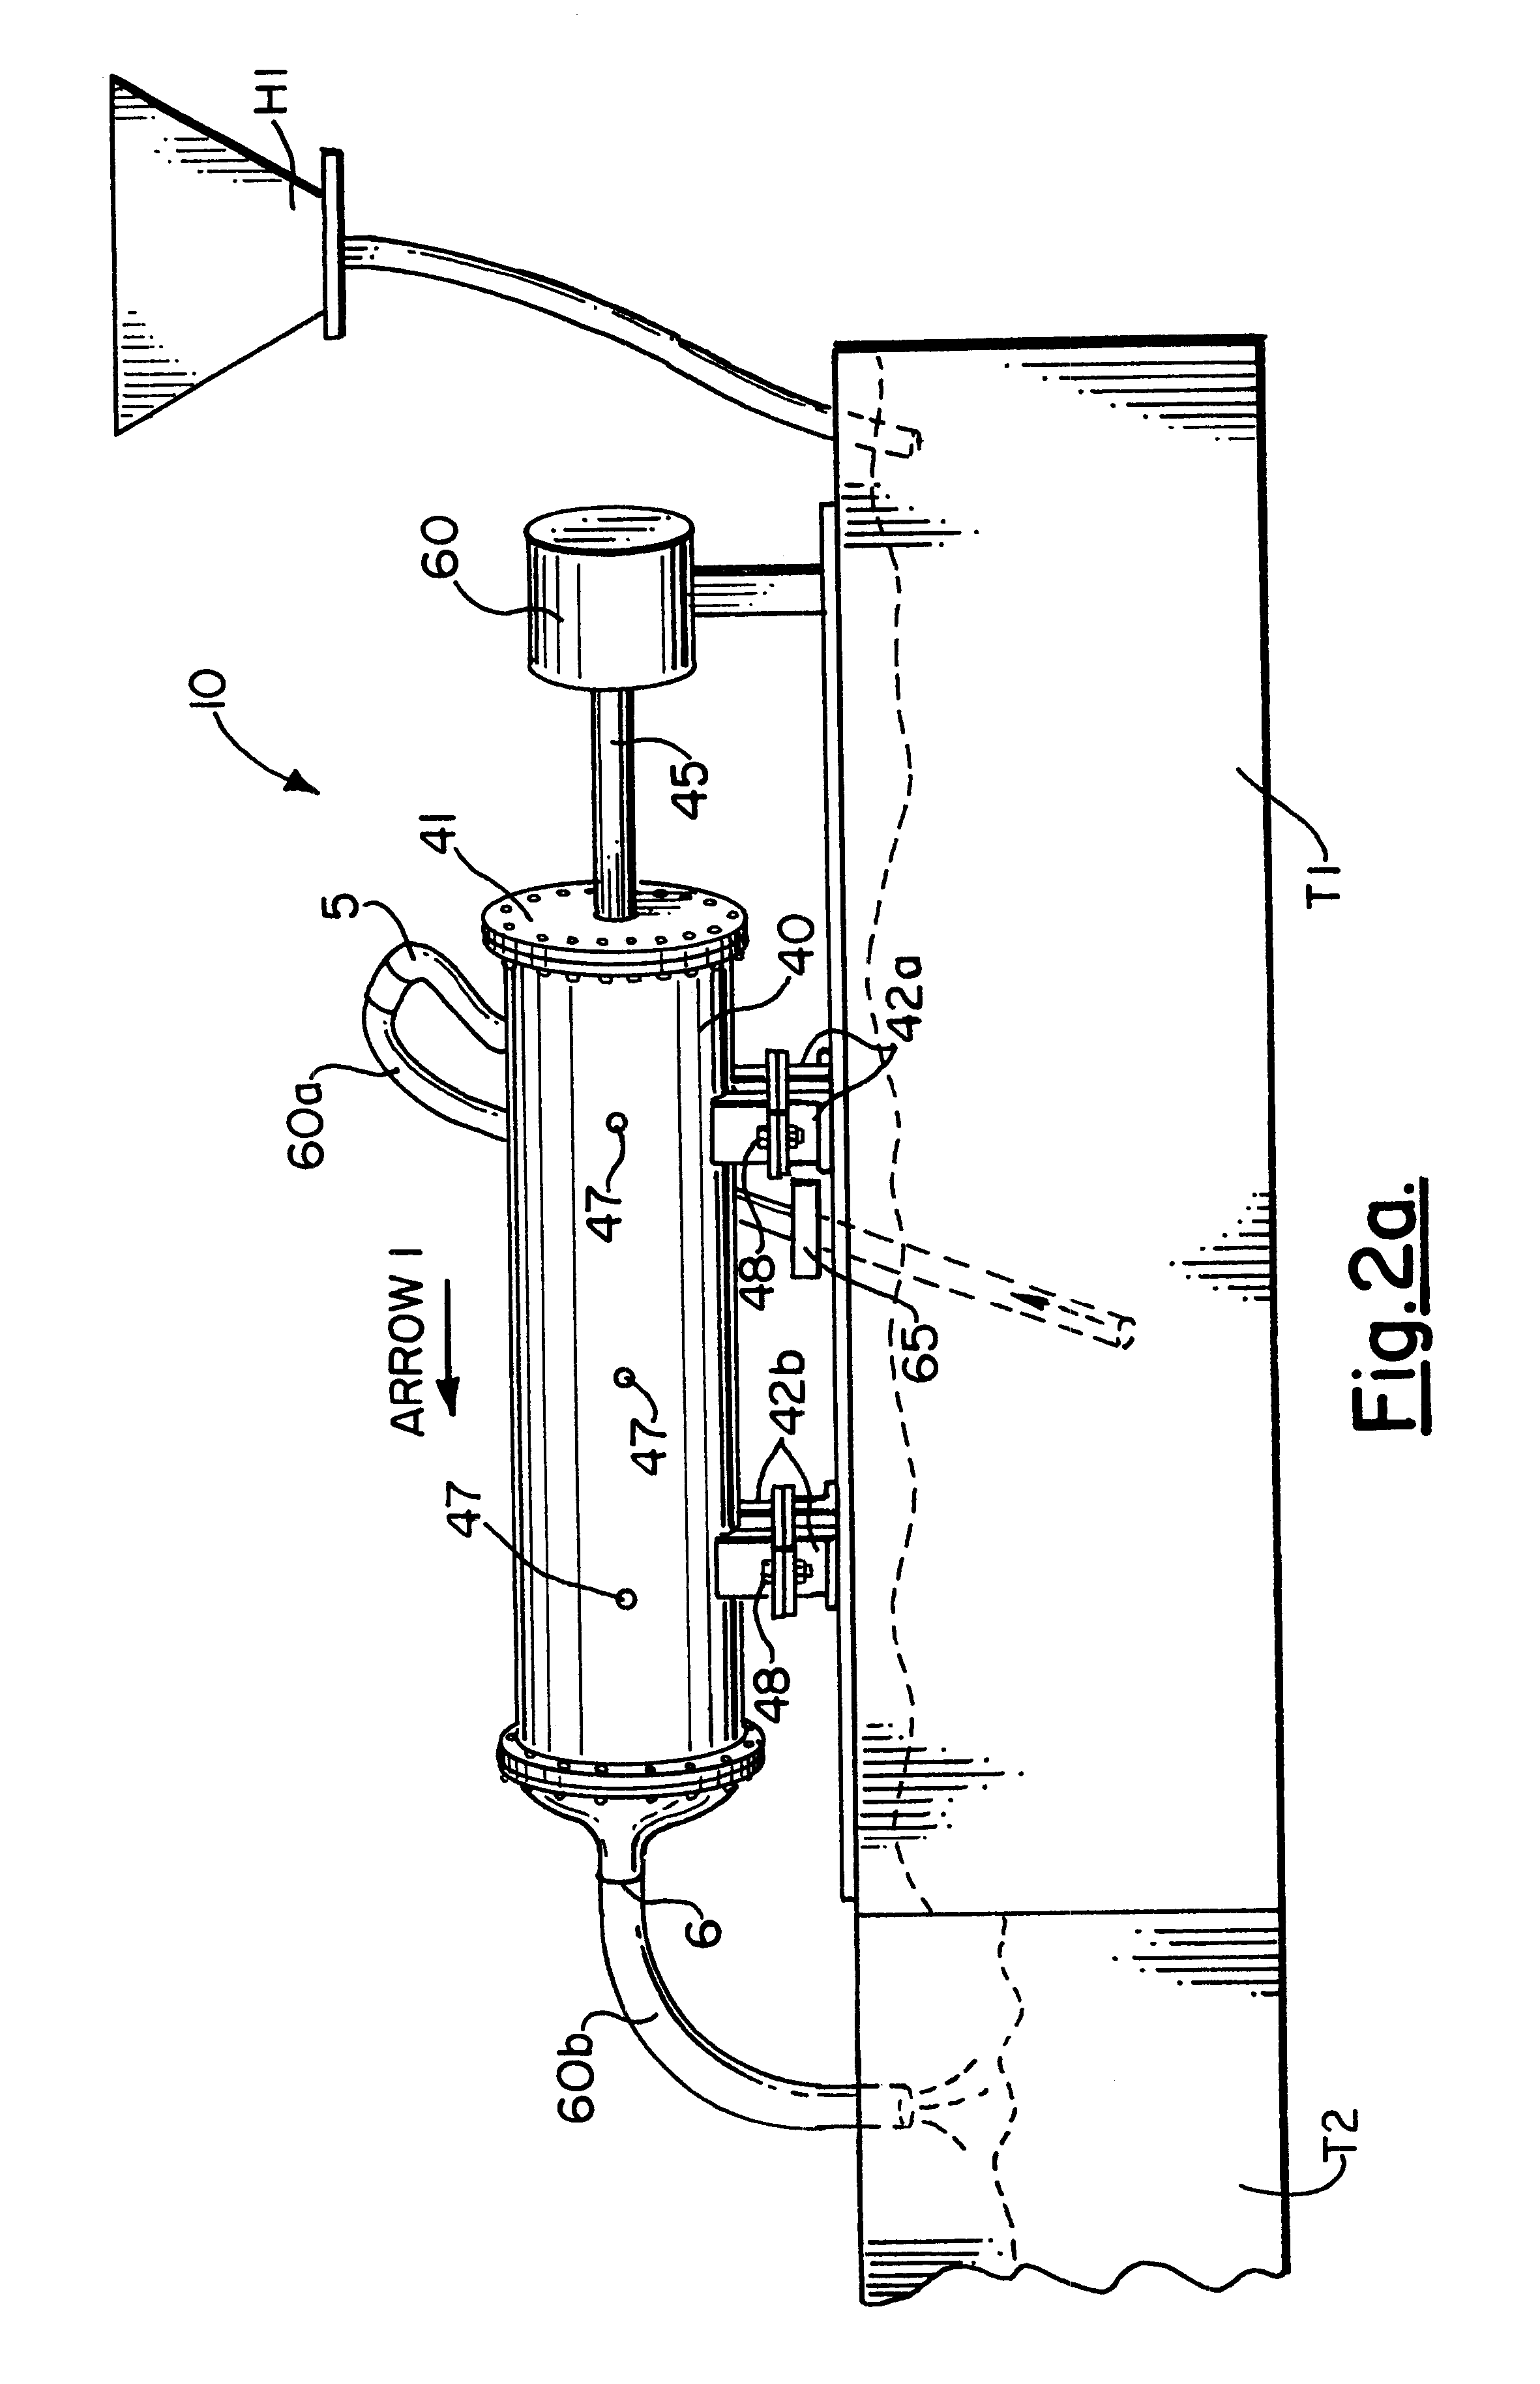 Method and apparatus for homogenizing drilling fluid in an open-loop process